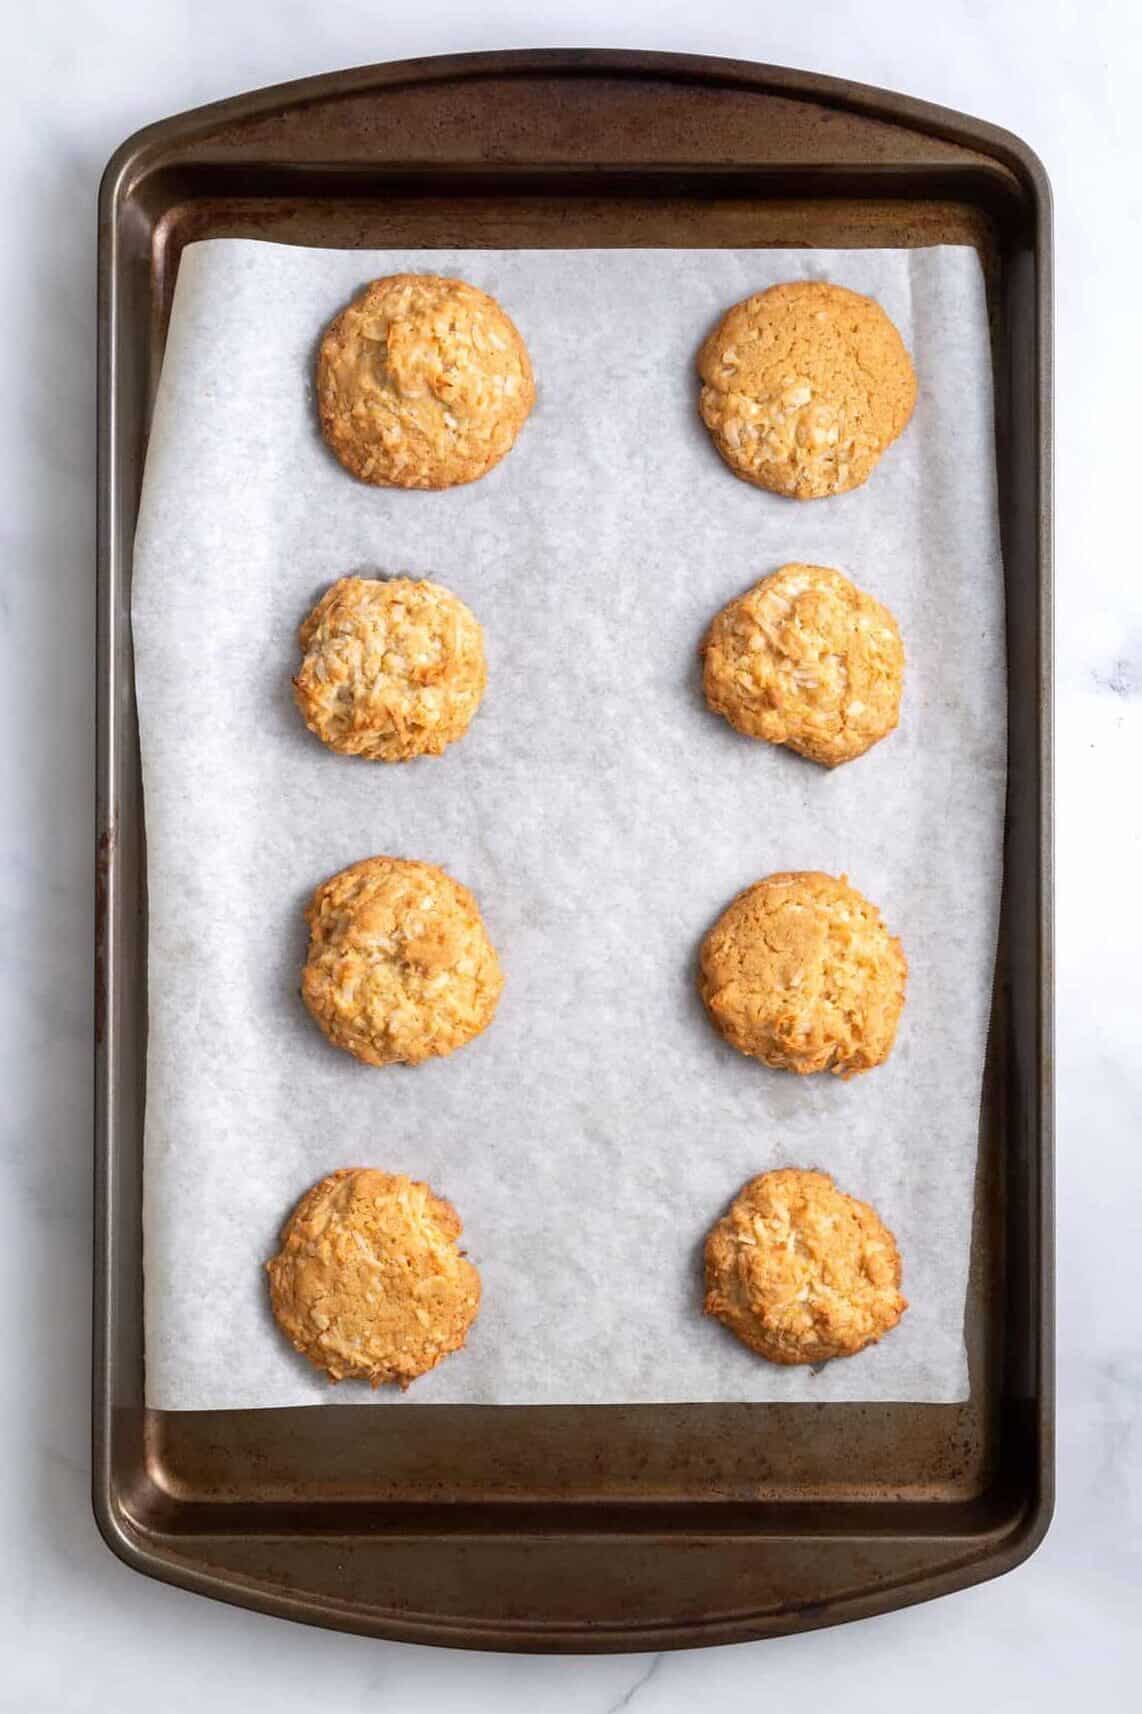 eight baked coconut cookies sitting on a baking tray with a baking sheet 